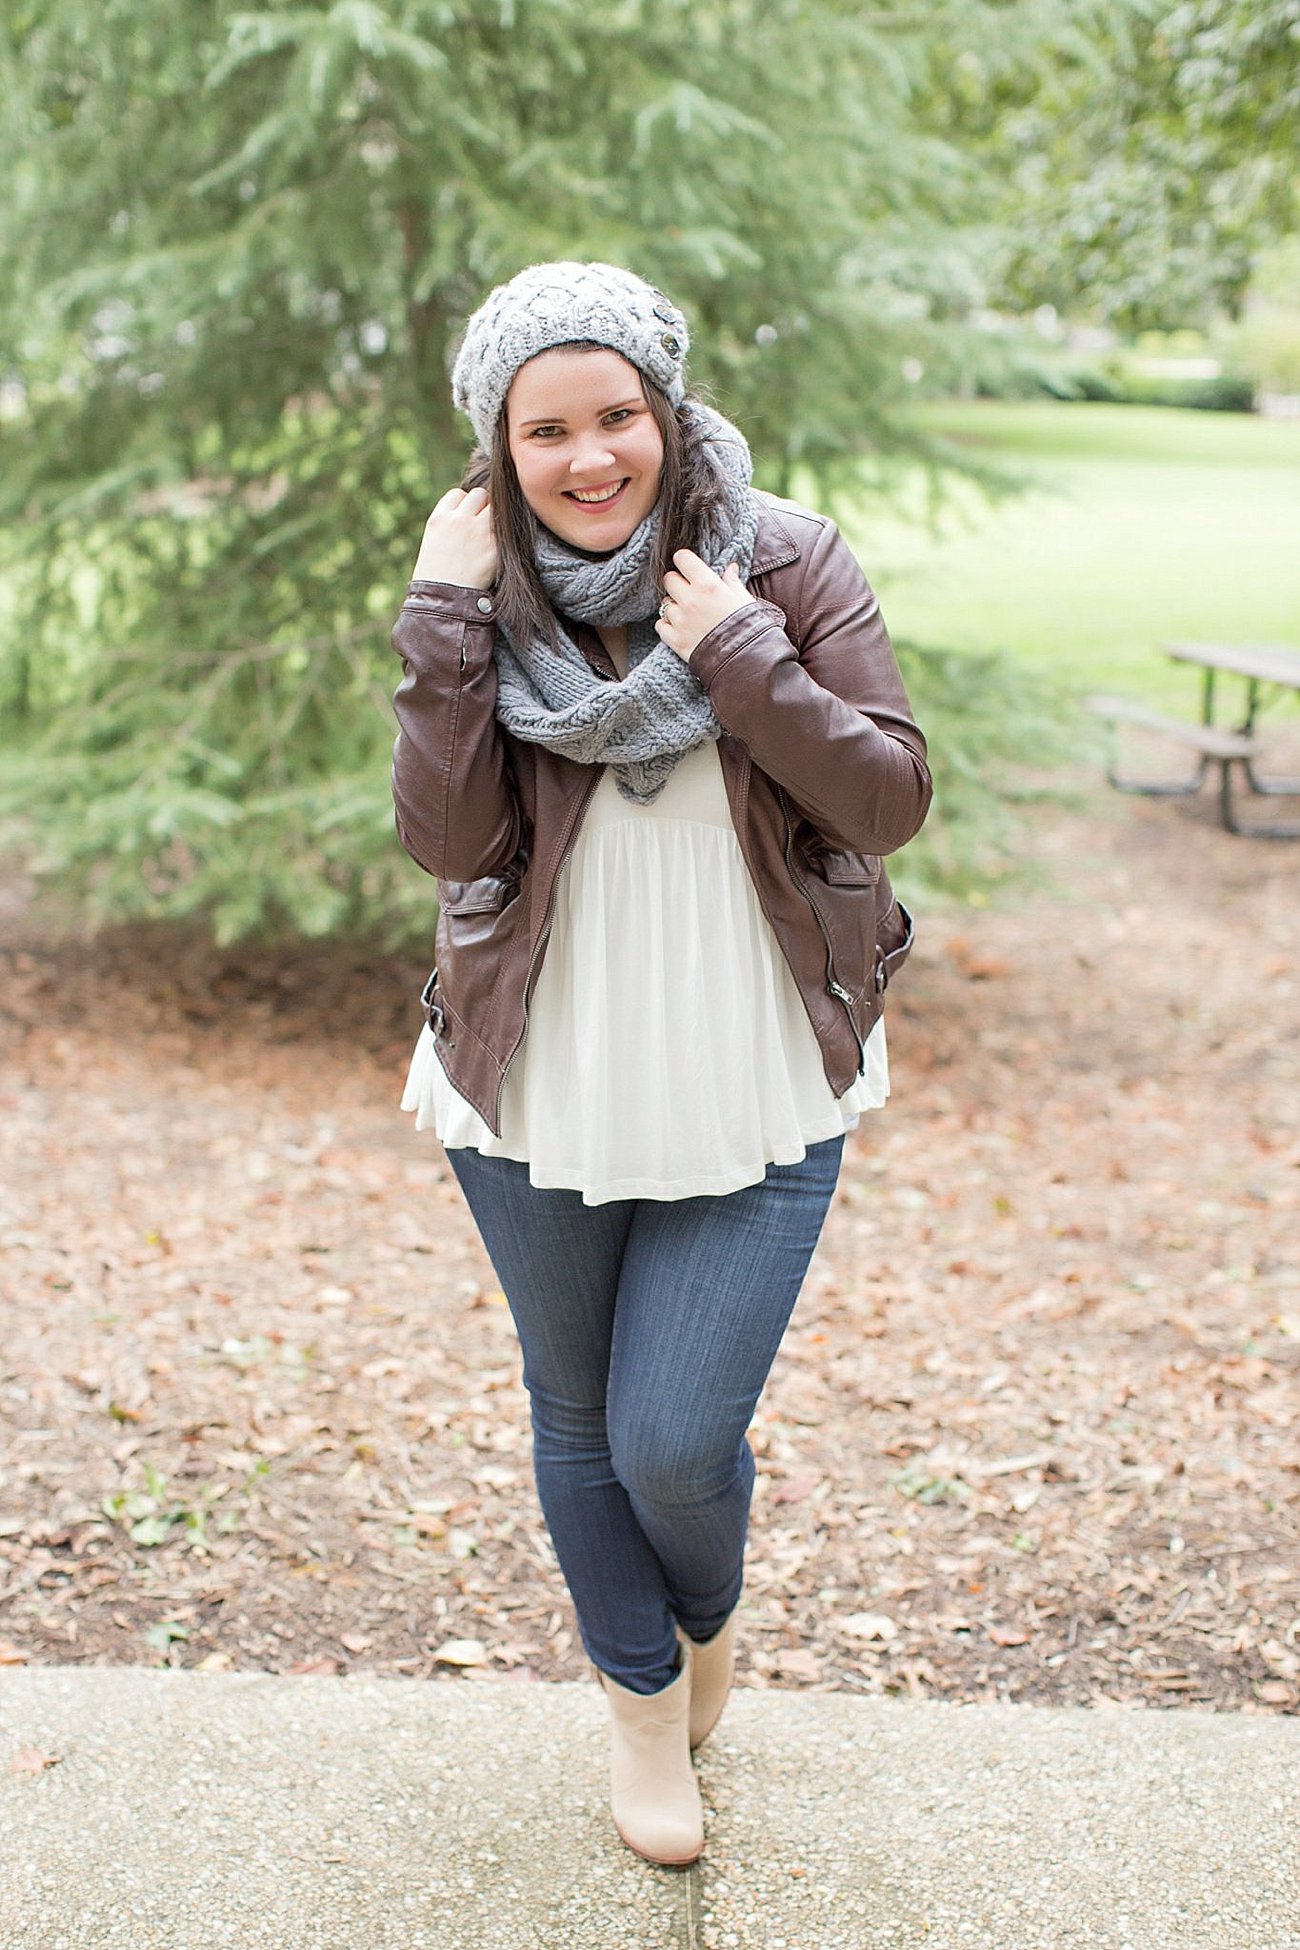 Rella beanie and scarf - ethical fashion - #cozyluxuries (5)